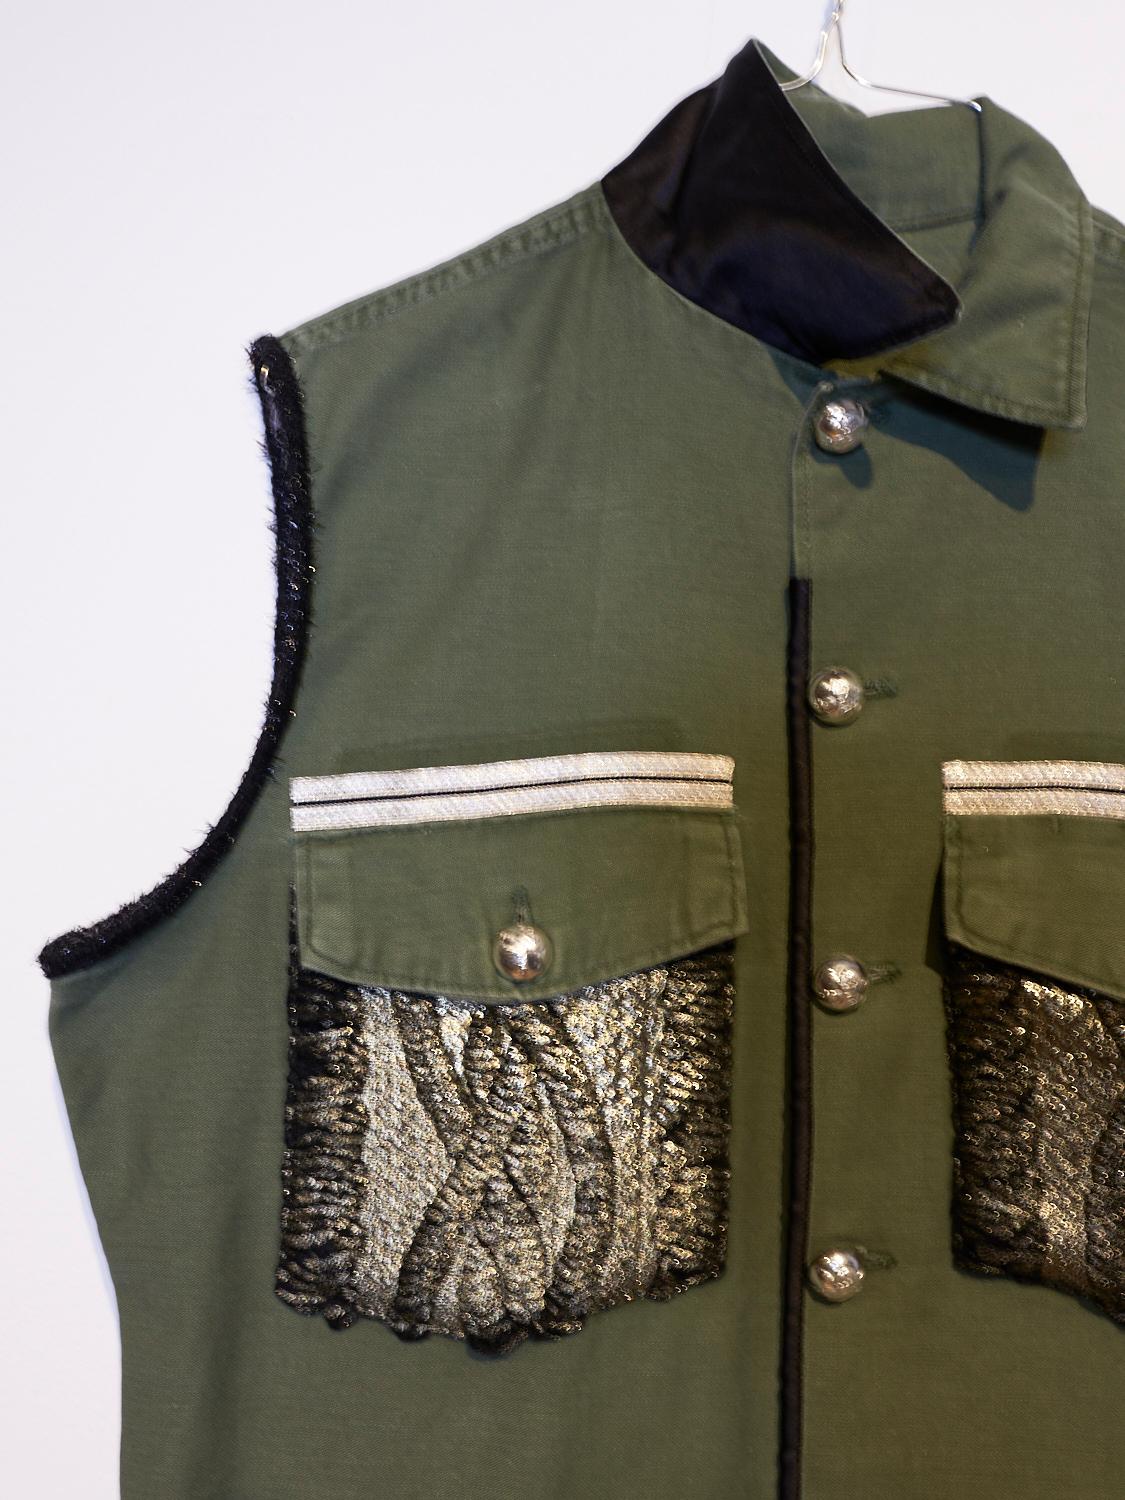 Embellished Sleeveless Jacket  Military Green Vest Gold Knit Pockets, Black Silk Collar and Vintage Silver Tone Brass Buttons. 
Can be worn as a Sleeveless Evening Blazer to black leather leggings or even to give a dress a more casual and versatile